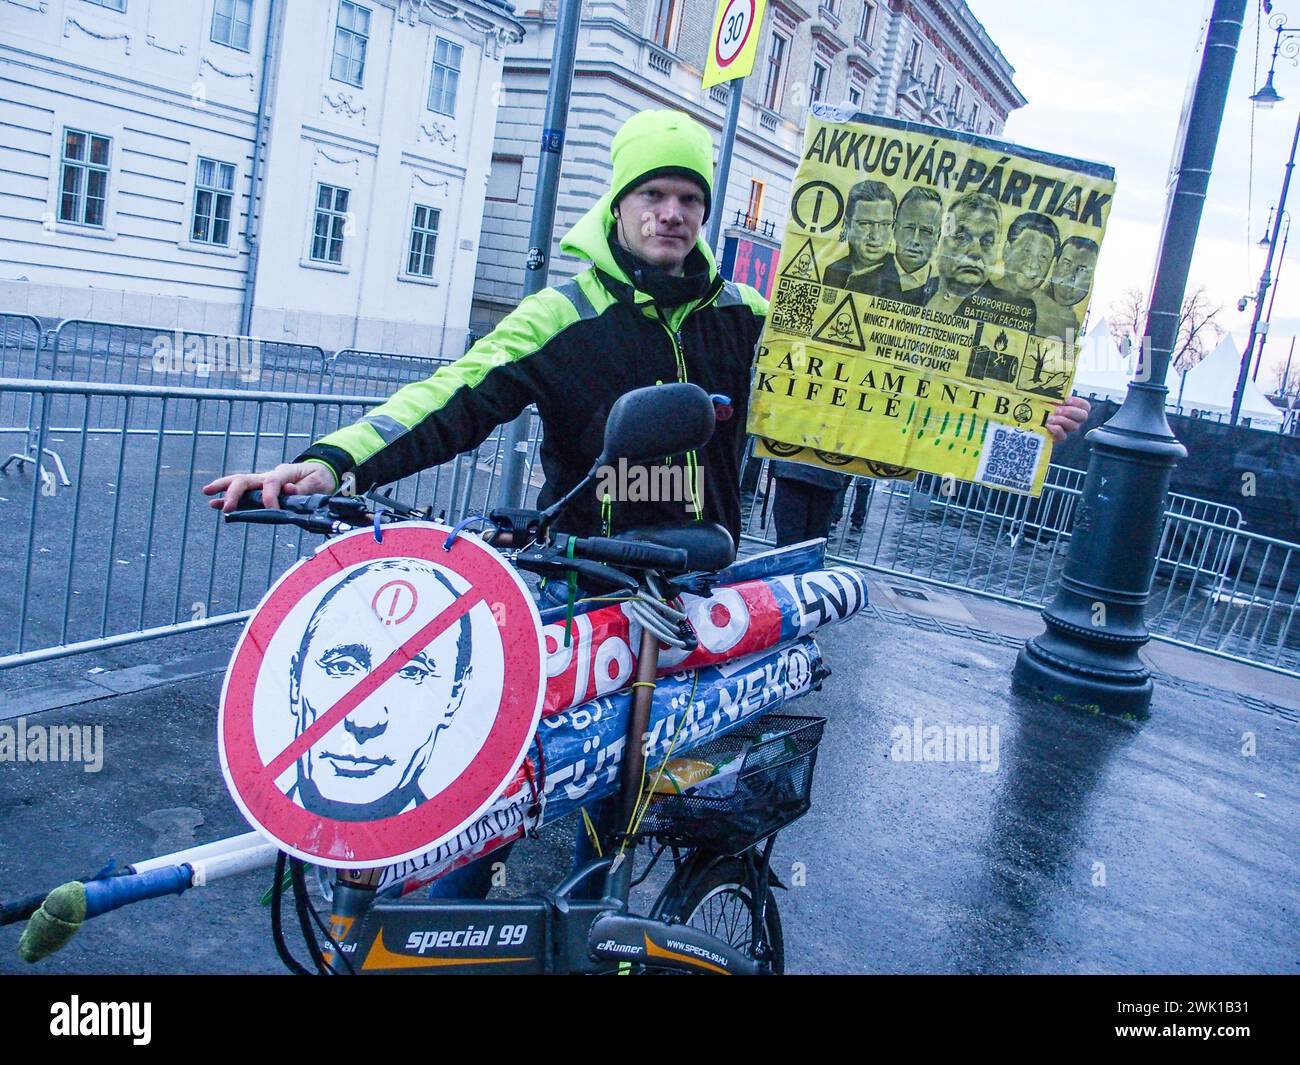 Budapest, Budapest, Hungary. 17th Feb, 2024. A Hungarian activist with his bike, holds sign saying Battery Party in protest of battery manufacturing as well as Throw Them from Parliament, in front of Varkert, where Hungarian Prime Minister VIKTOR ORBAN made his annual speech and comments on three resignations of Hungarian President, KATALIN NOVAK; former Minister and leadership of Hungarian Reform Church, ZOLTAN BALOG and former Justice Minister, JUDIT VARGA following exposure of a man pardoned last year from covering up pedophilia in a children's home. The reveal has caused embarrassment Stock Photo